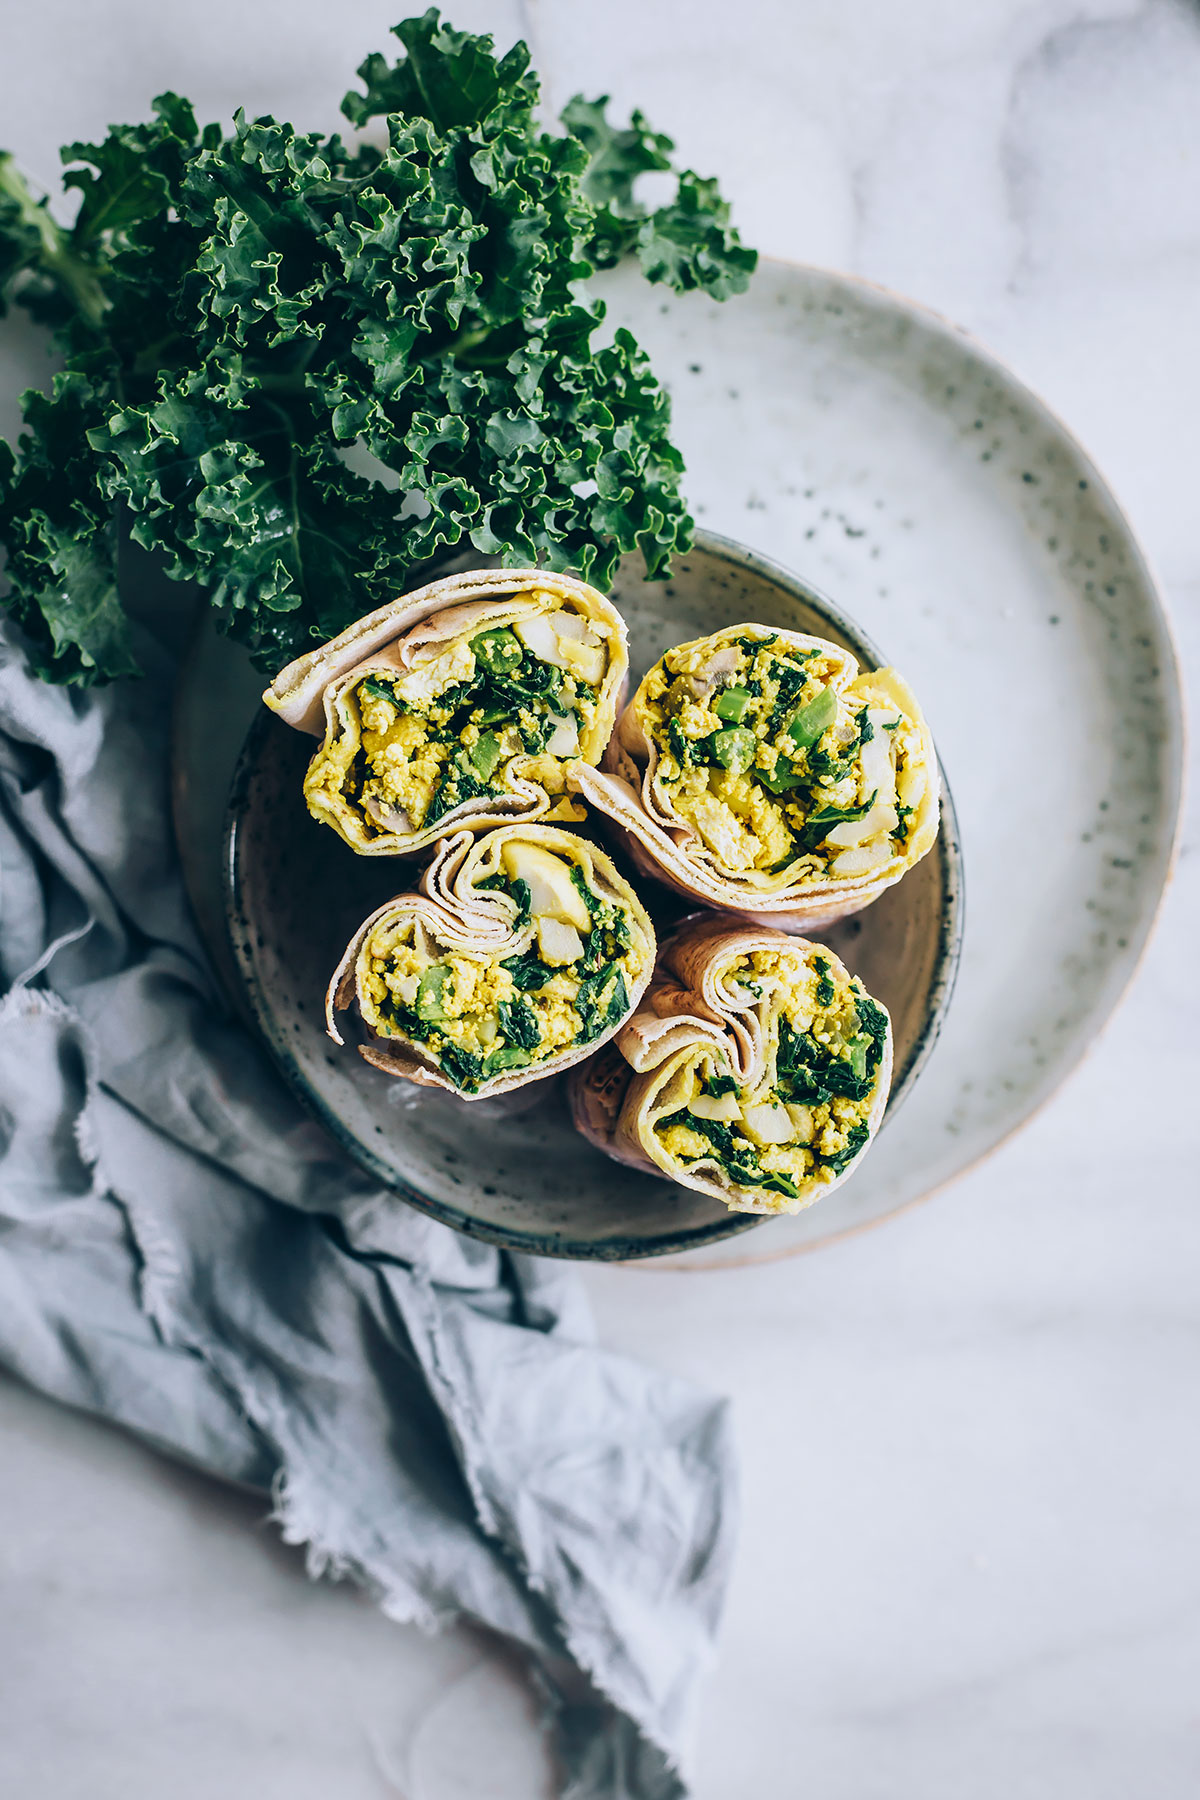 Make-and-Freeze Tofu Scramble Wraps for Busy Mornings